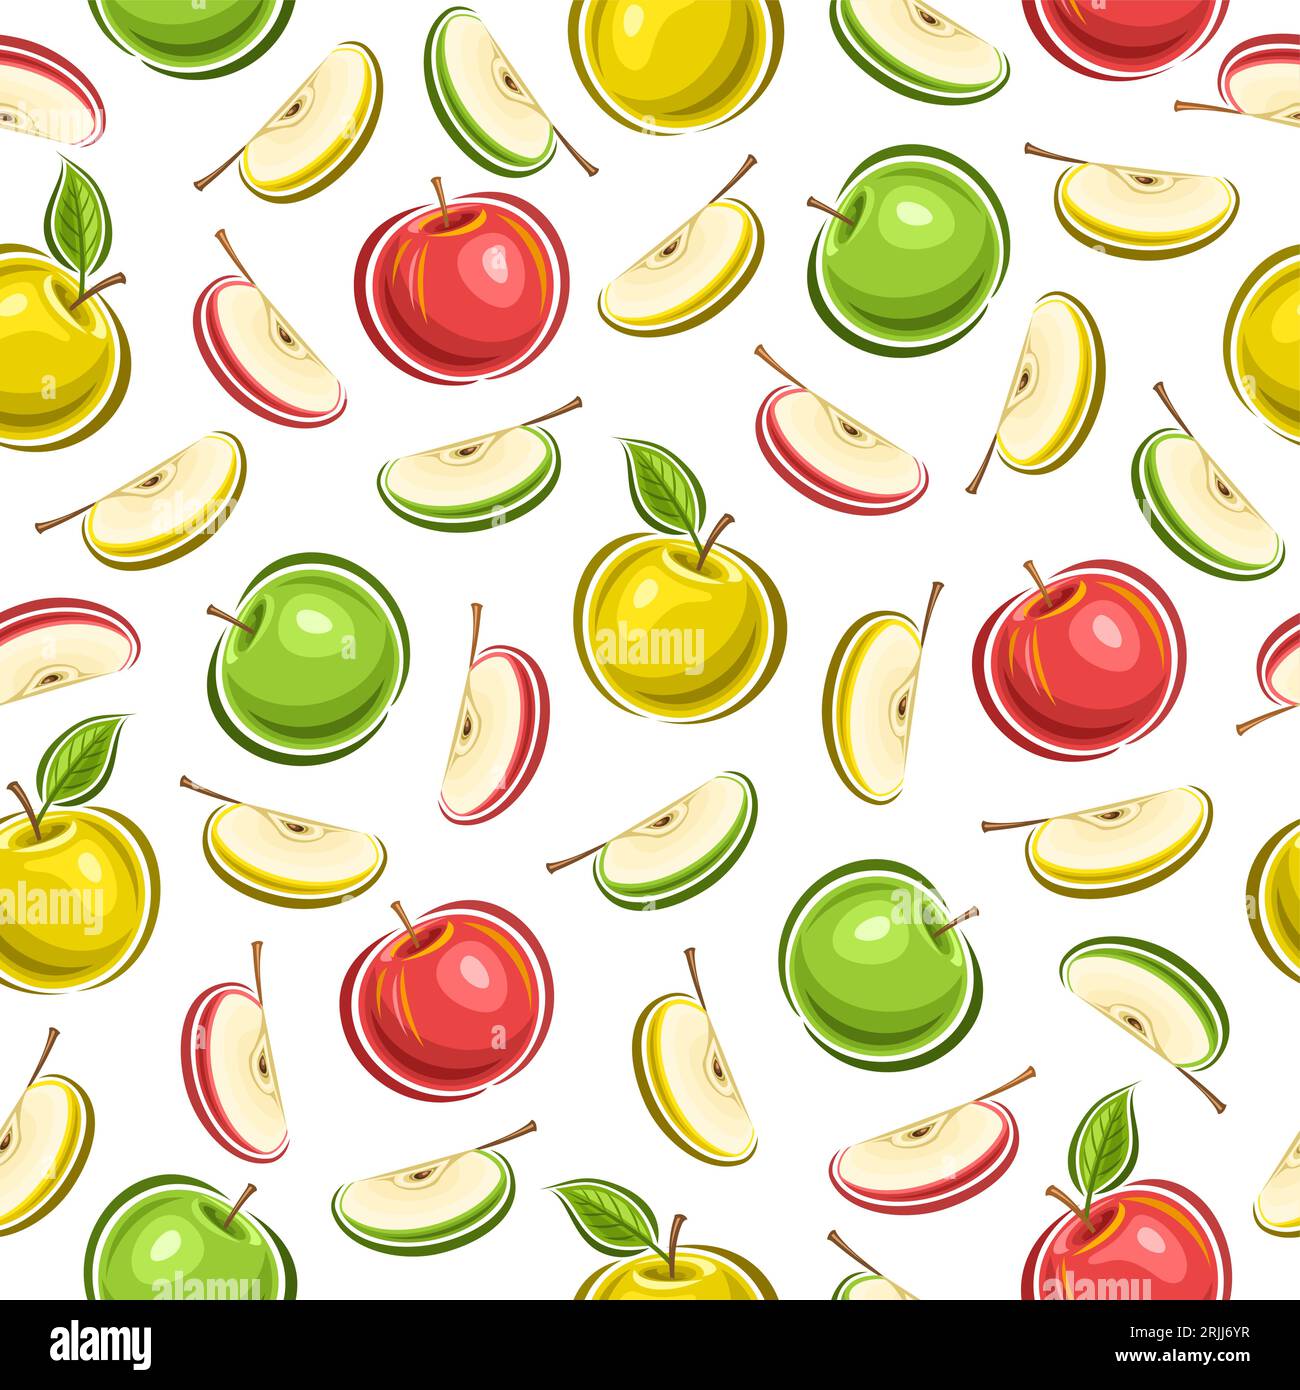 Vector Colorful Apple seamless pattern, square repeat background with cut out illustrations of juicy chopped apples with green leaves for wrapping pap Stock Vector